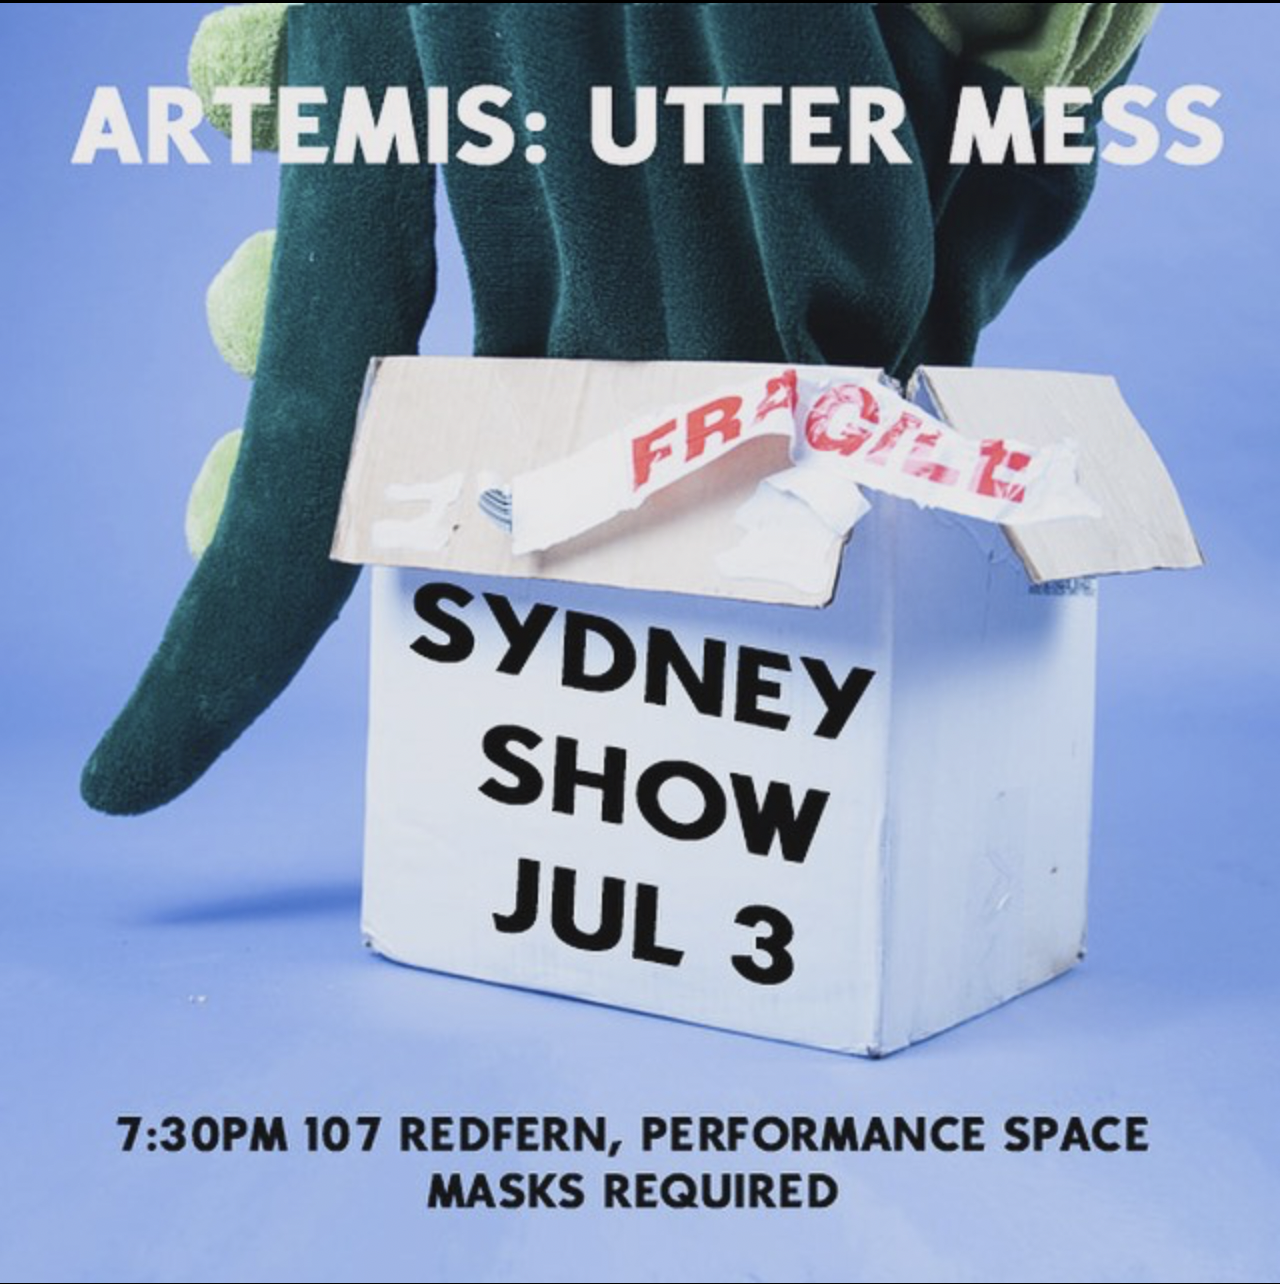 The image is a promotional poster for Artemis: Utter Mess. The test on the poster reads- 